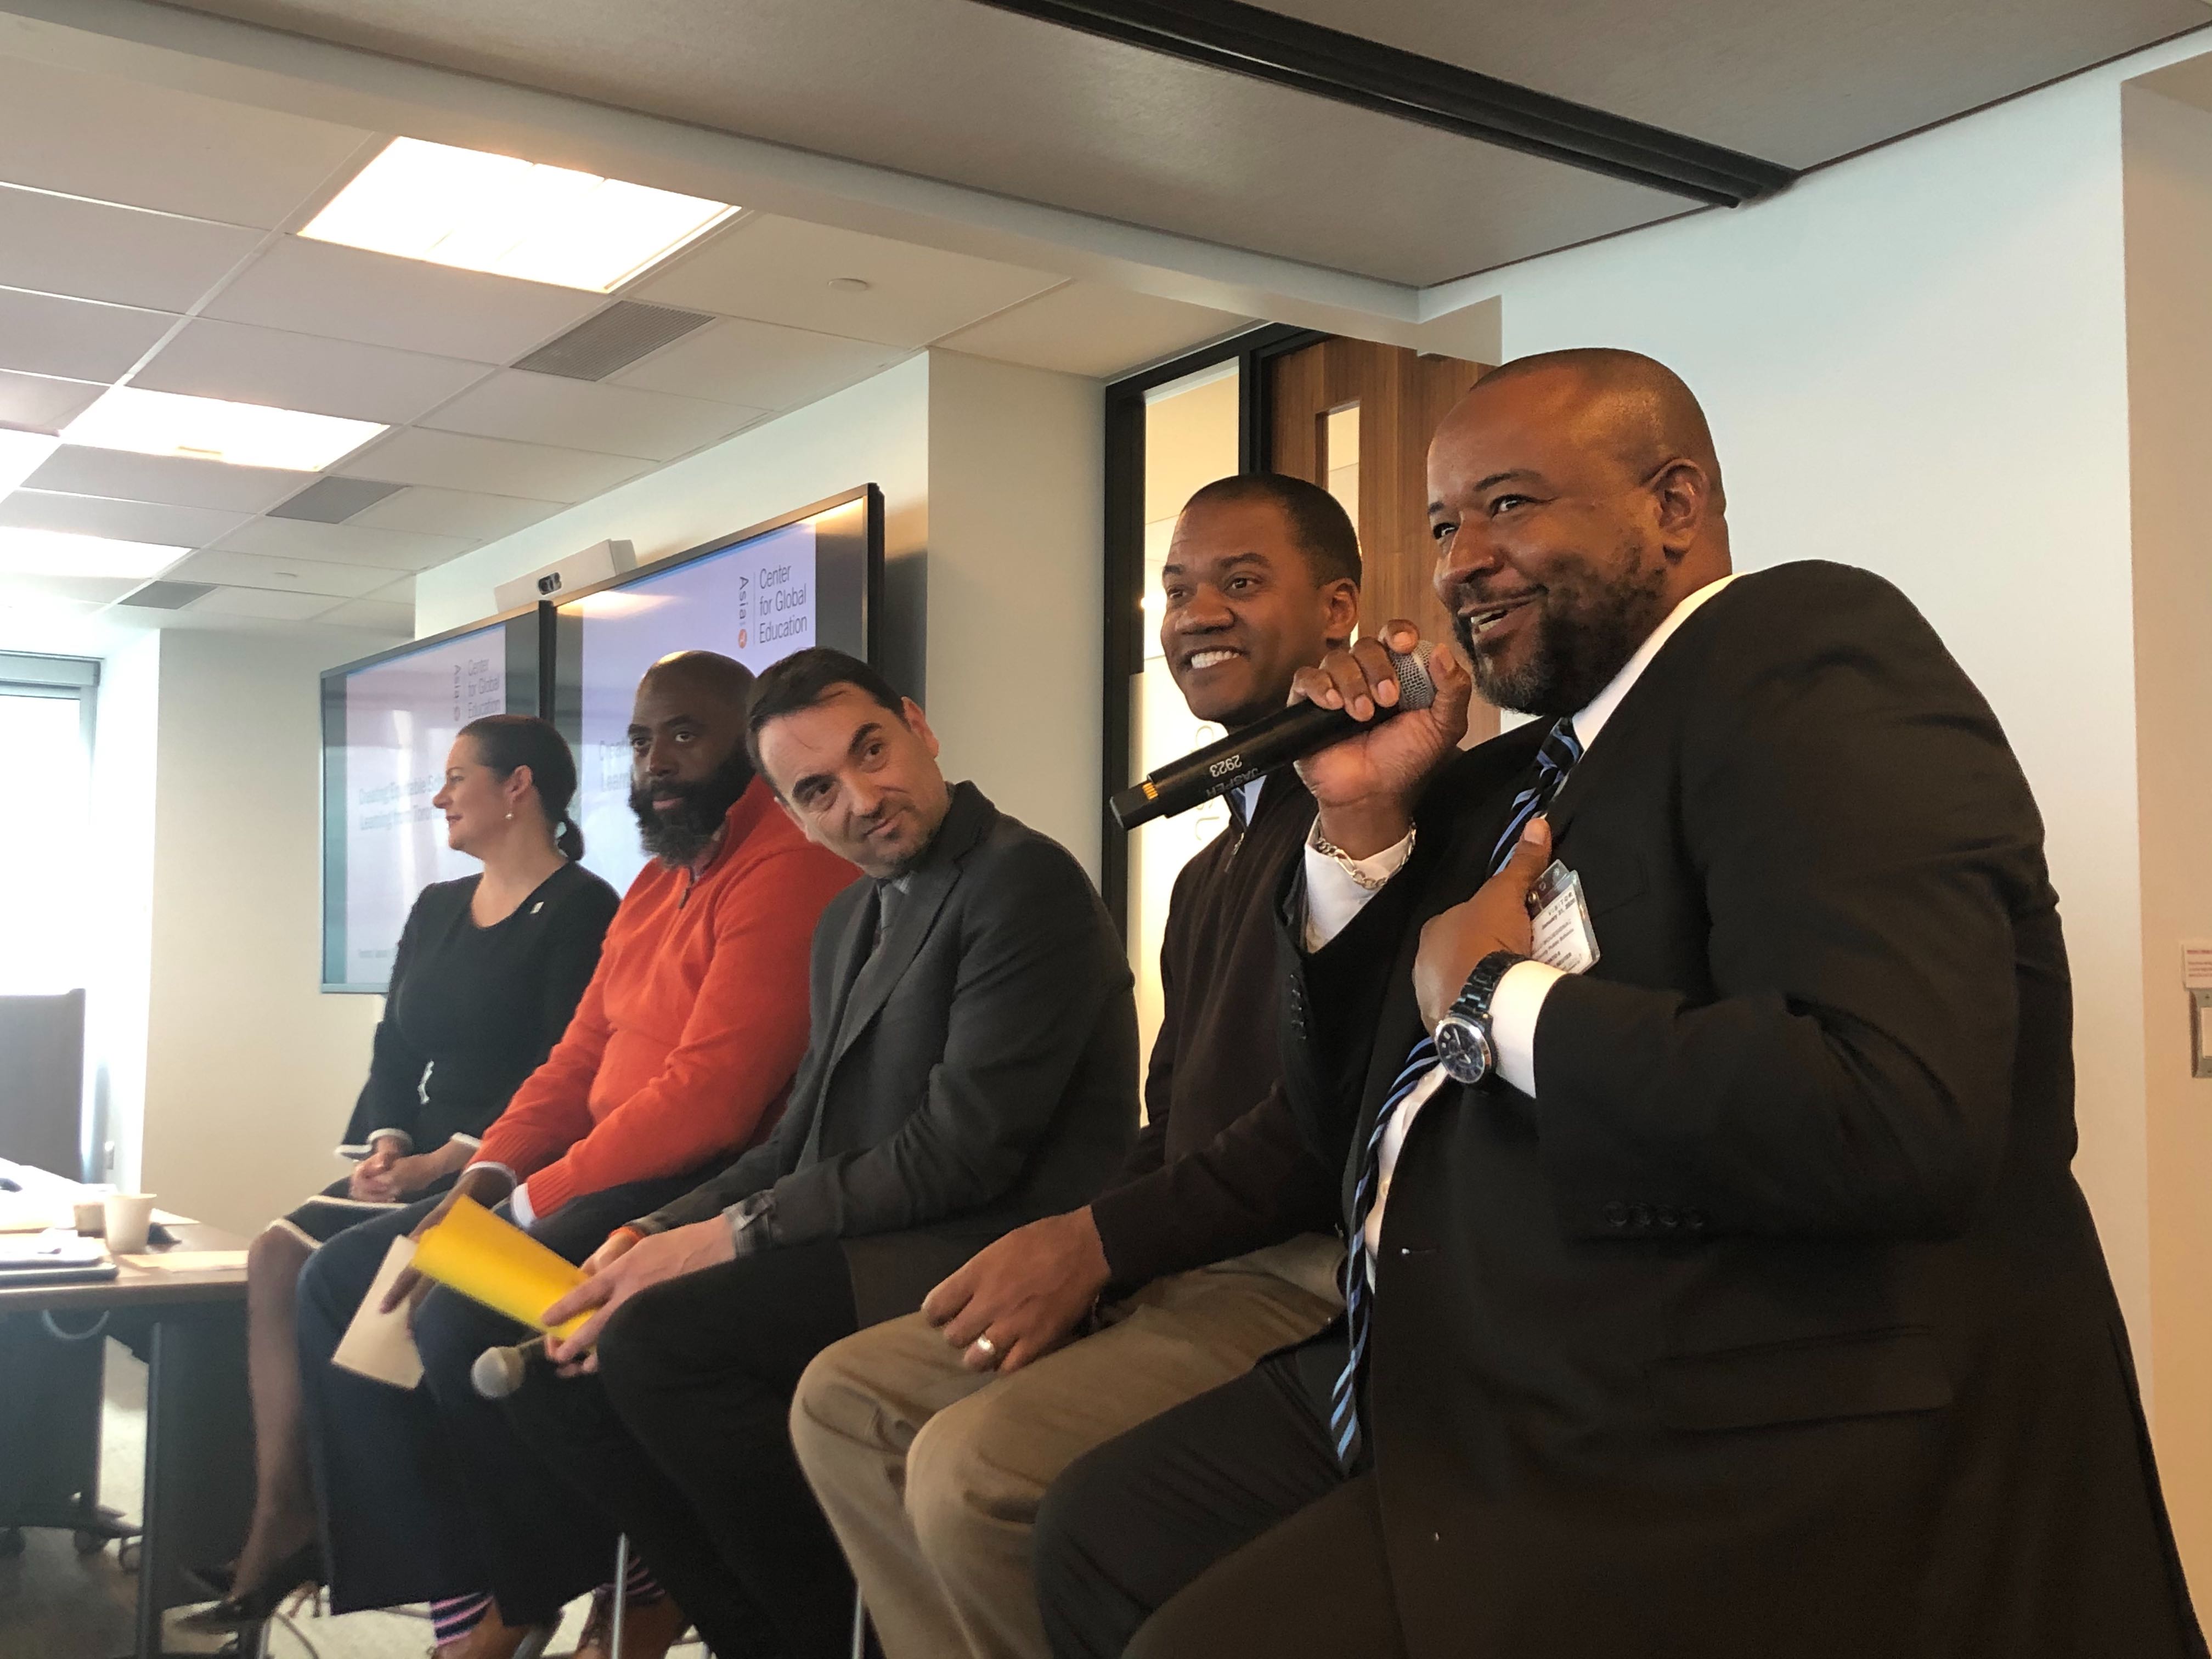 Leaders from five League of Innovative Schools districts presented their strategies for addressing equity challenges in their school communities.